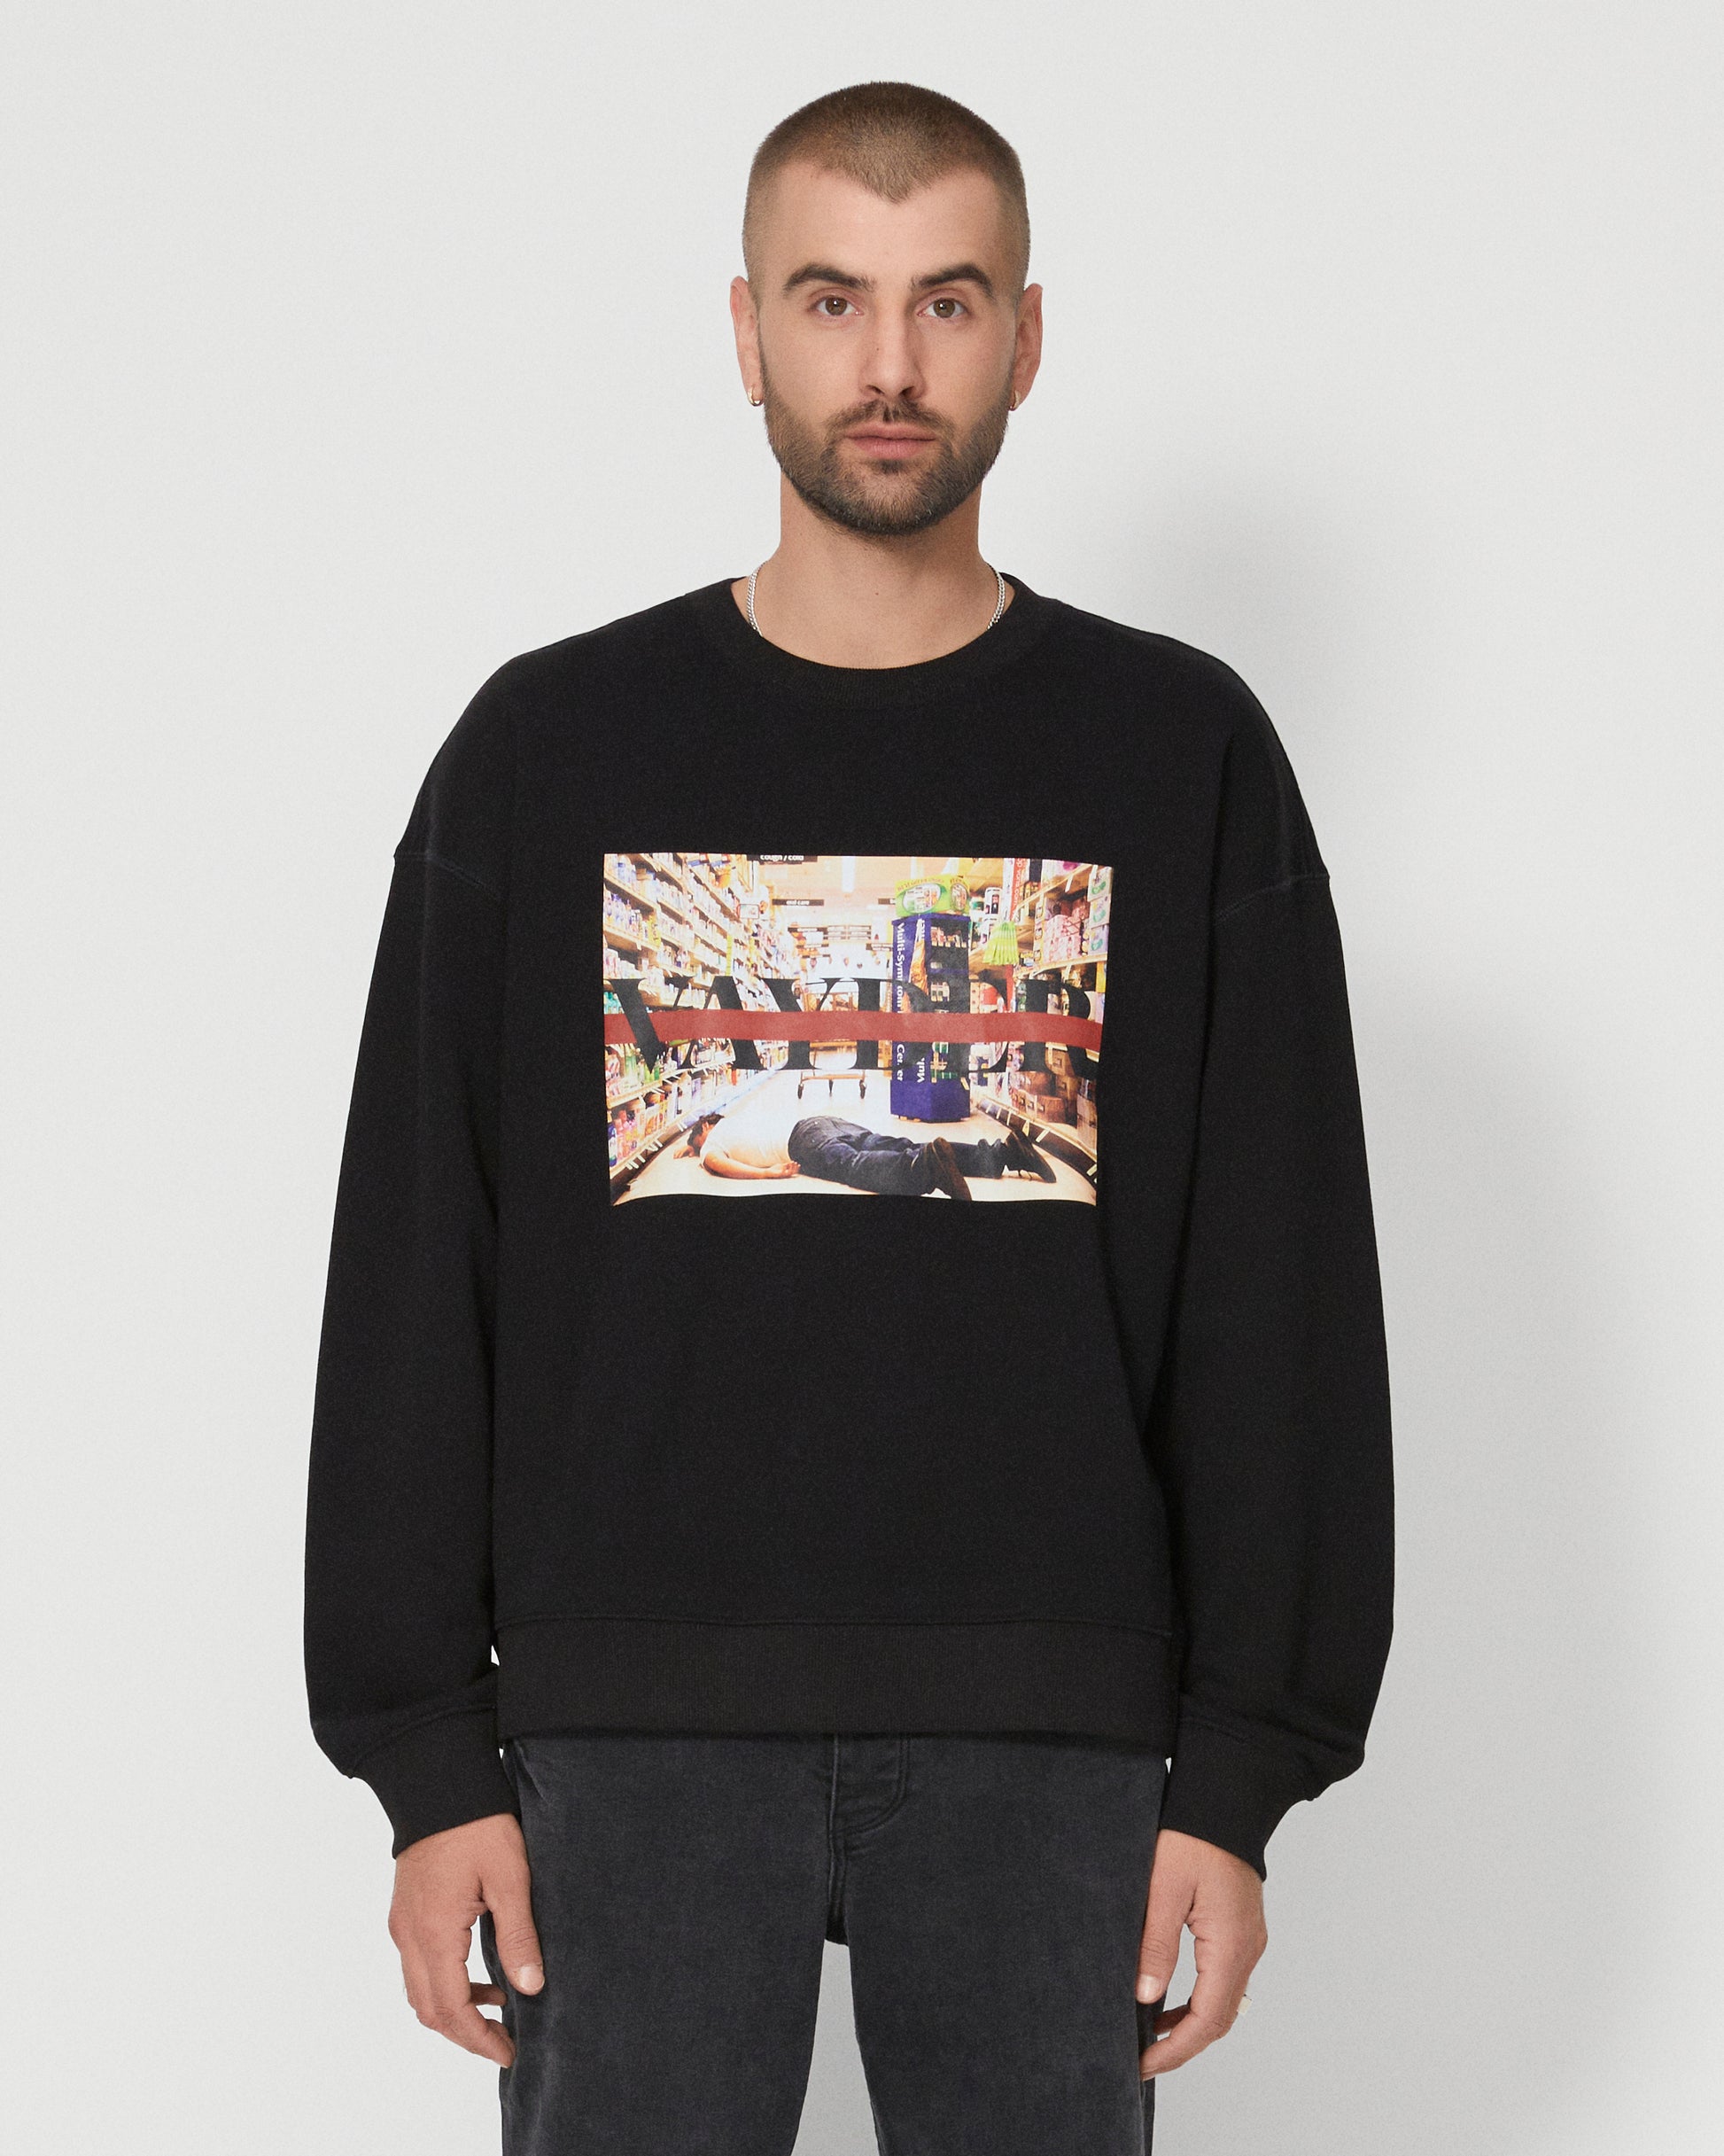 A man wearing a black sweatshirt with a picture on it.